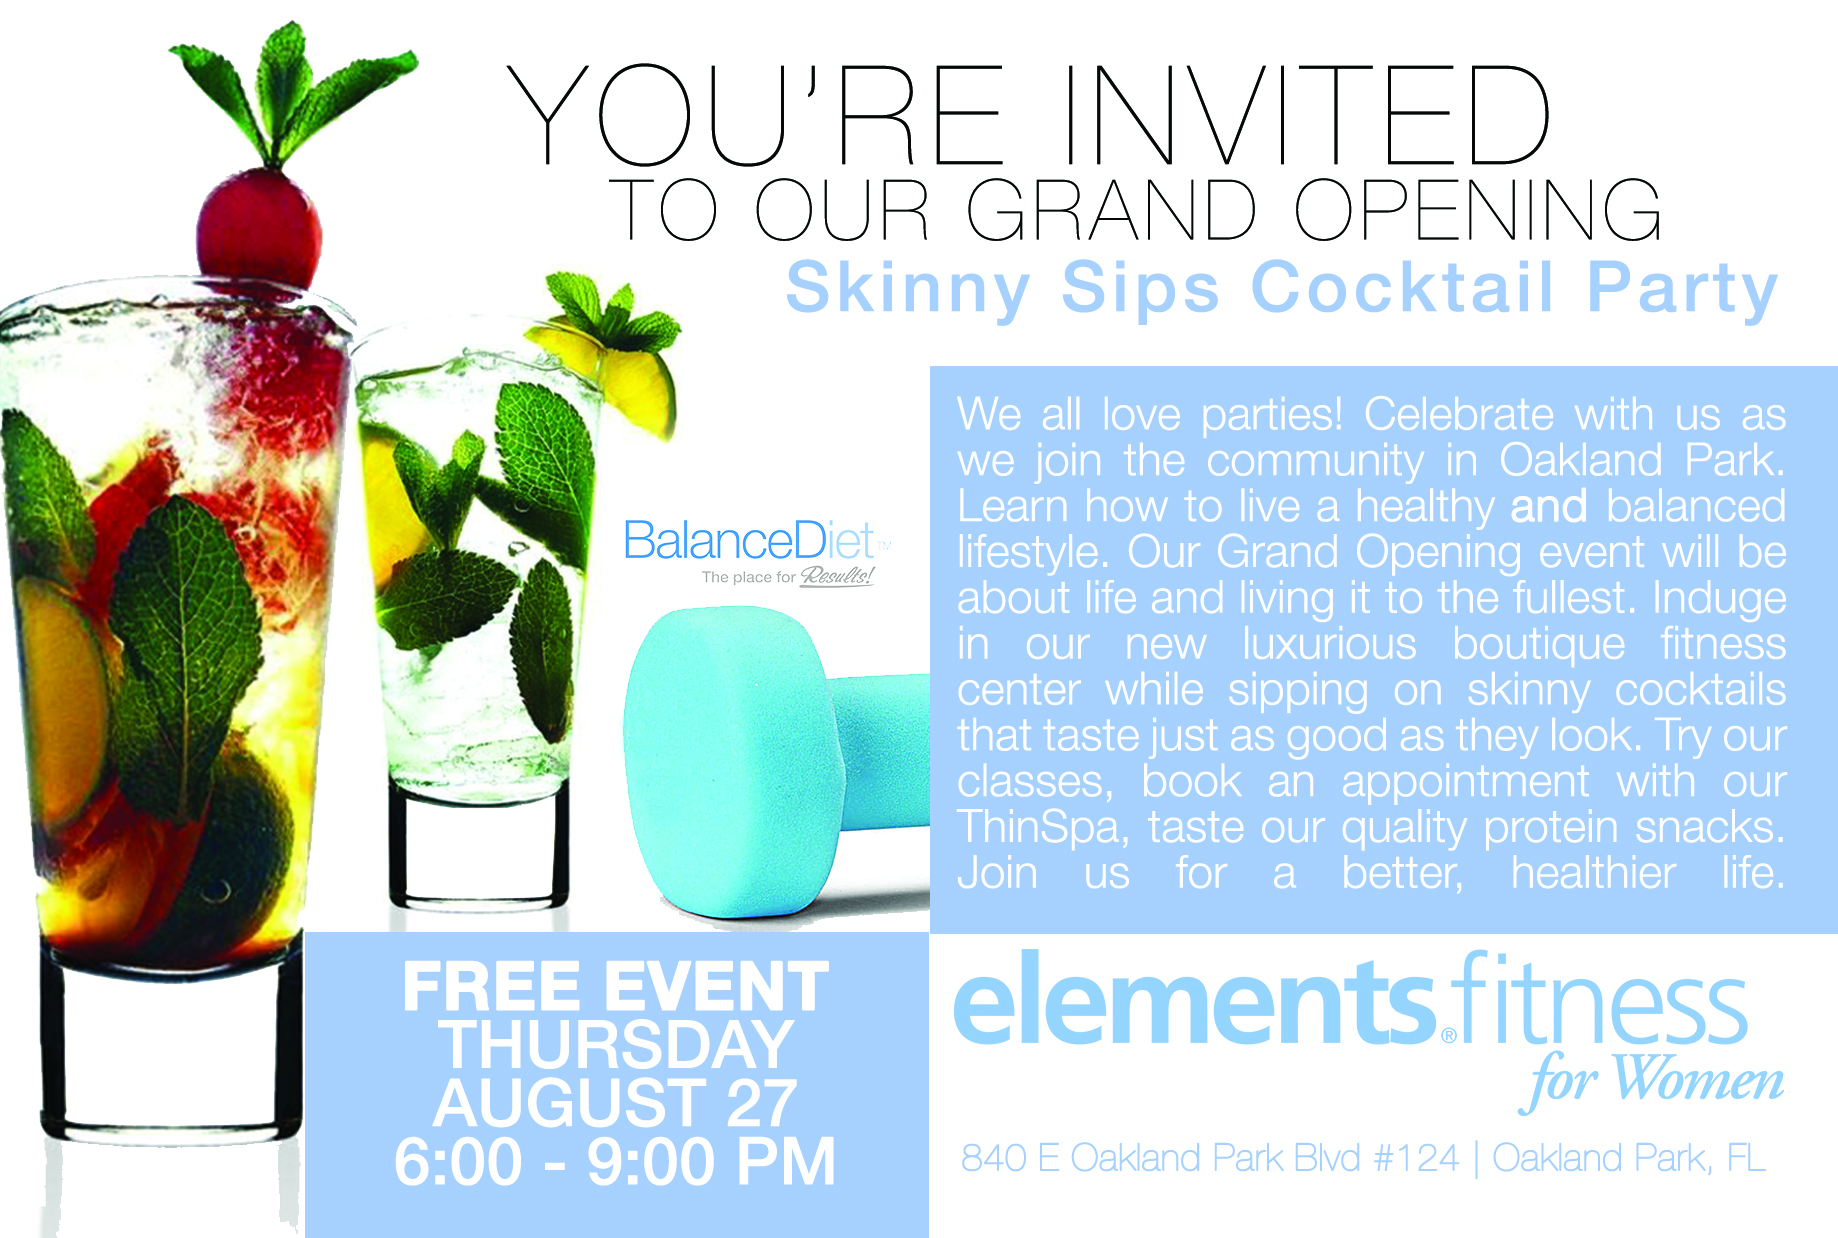 Grand Opening elements fitness for women